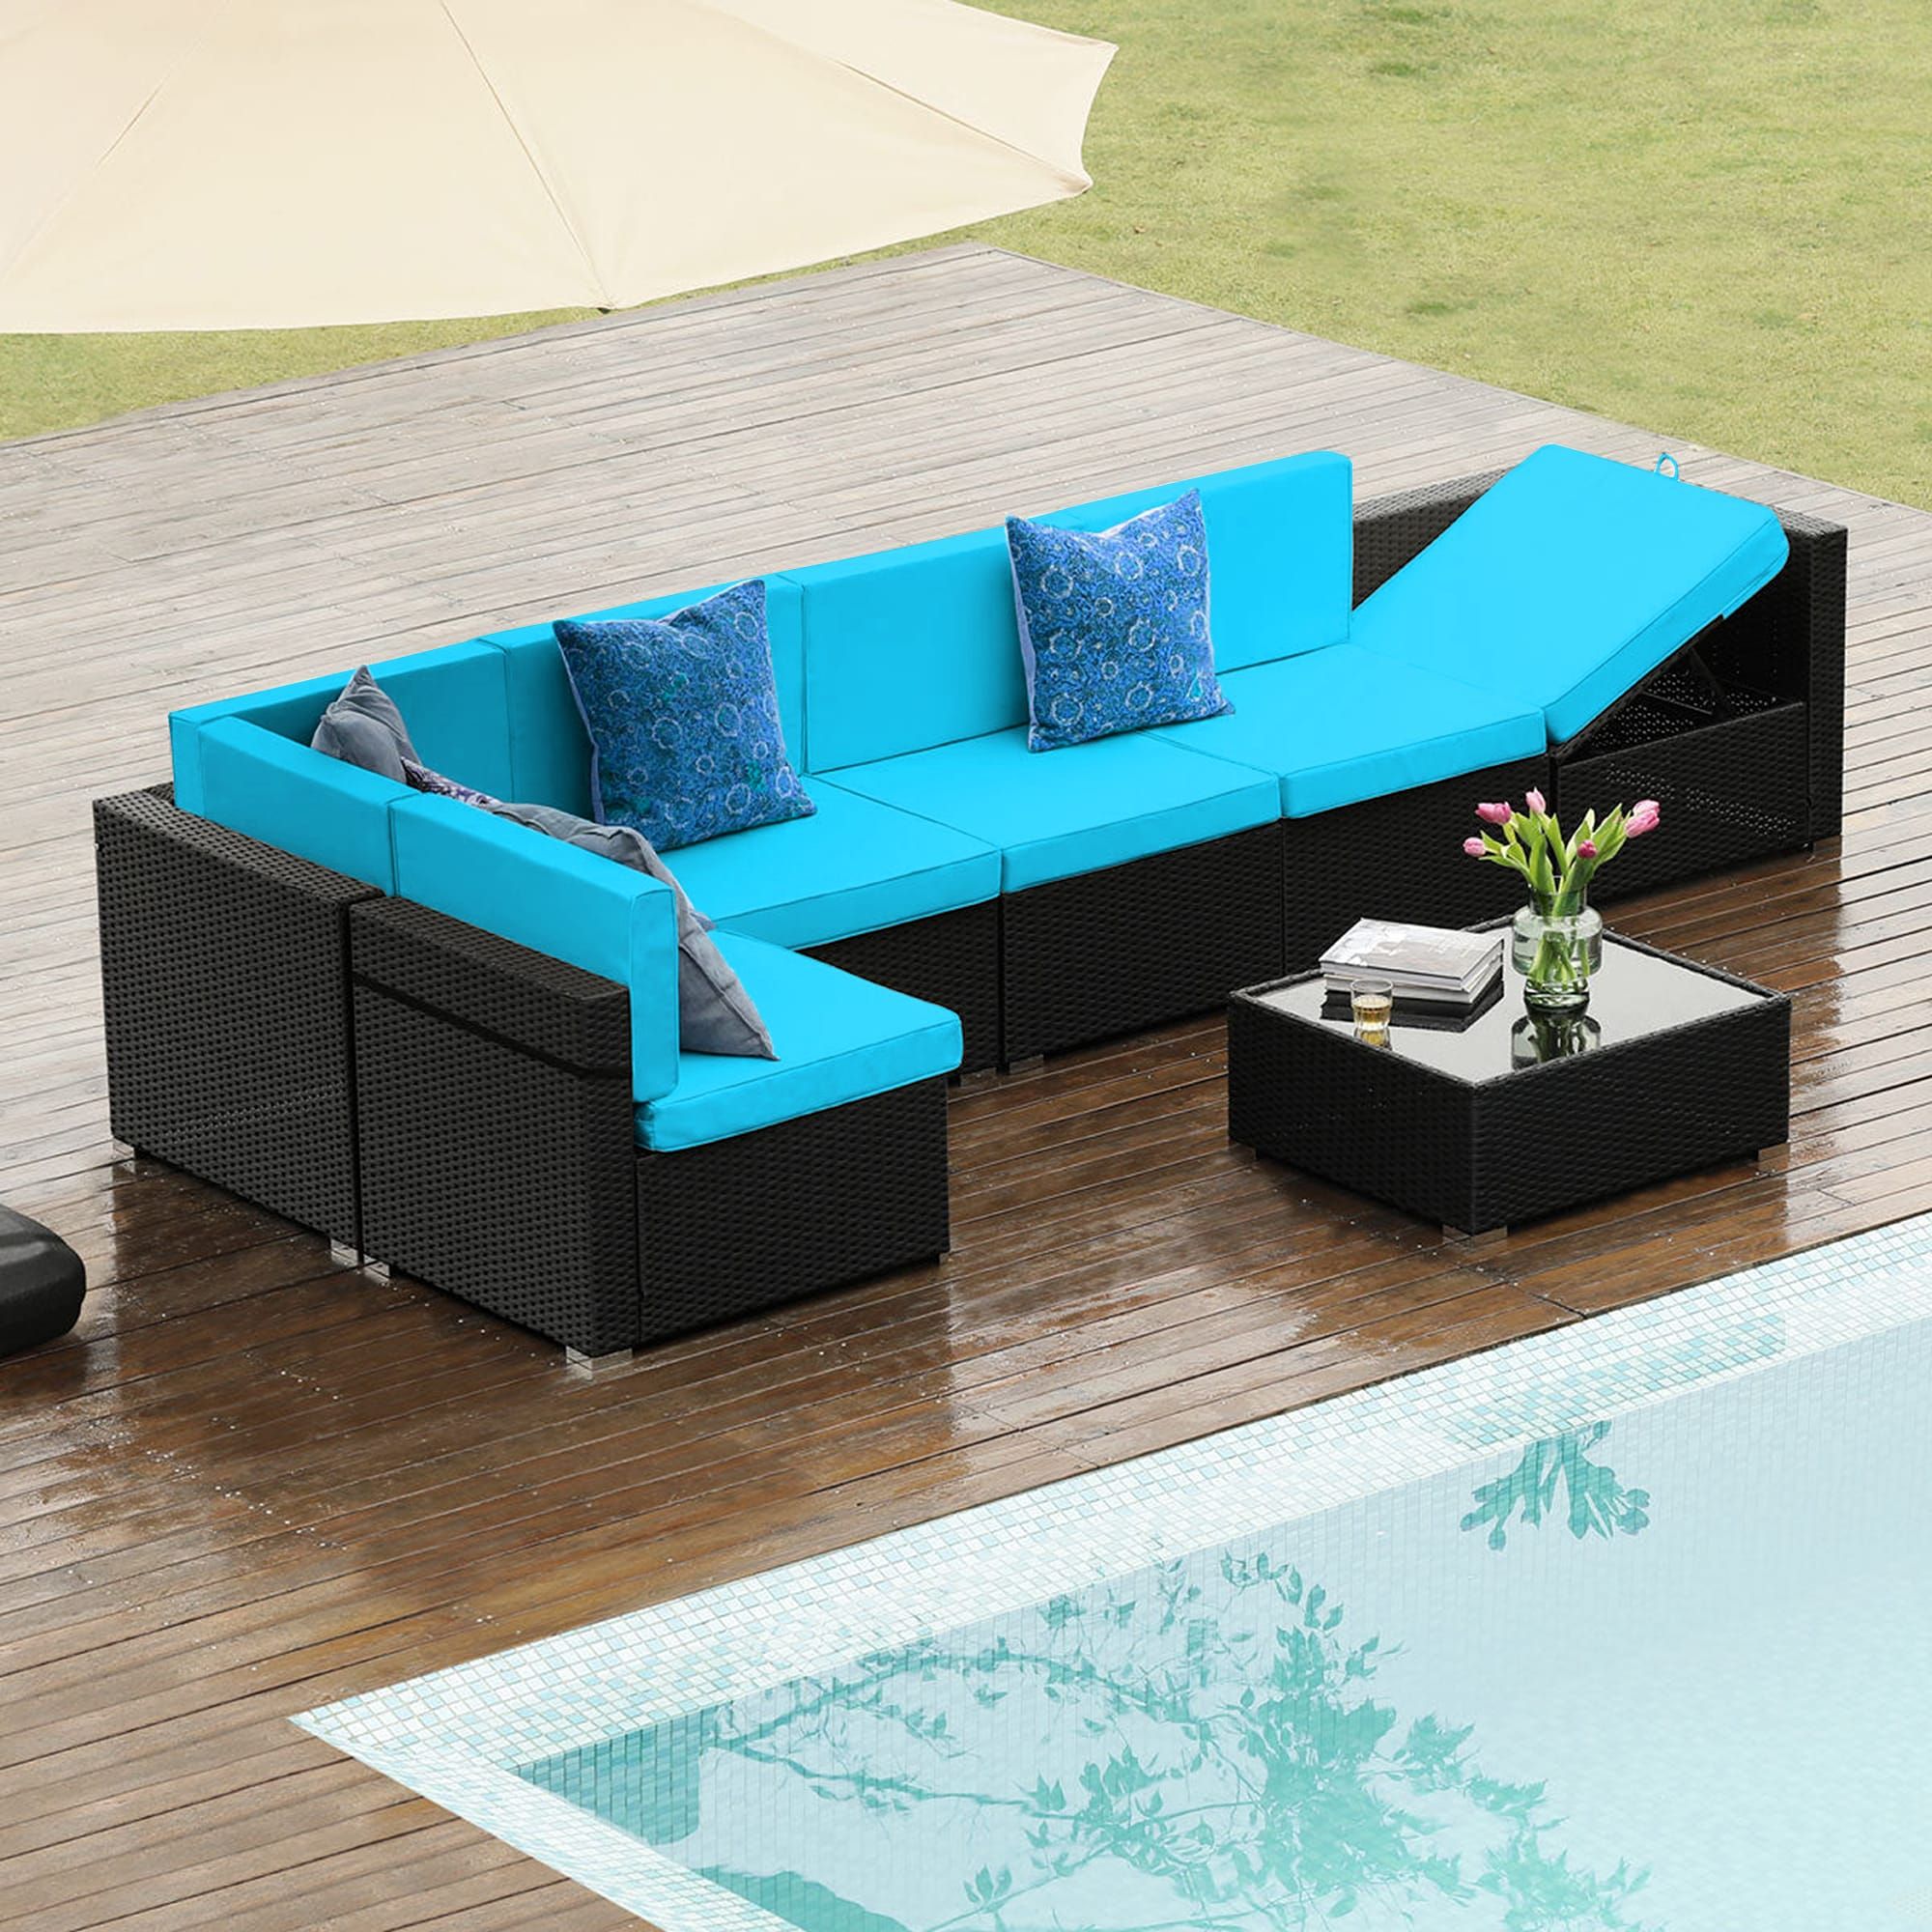 7  Piece Patio Conversation Set Rattan Outdoor Sectional With Blue  Cushion(s) And Iron Frame In The Patio Sectionals & Sofas Department At  Lowes Pertaining To Side Table Iron Frame Patio Furniture Set (View 5 of 15)